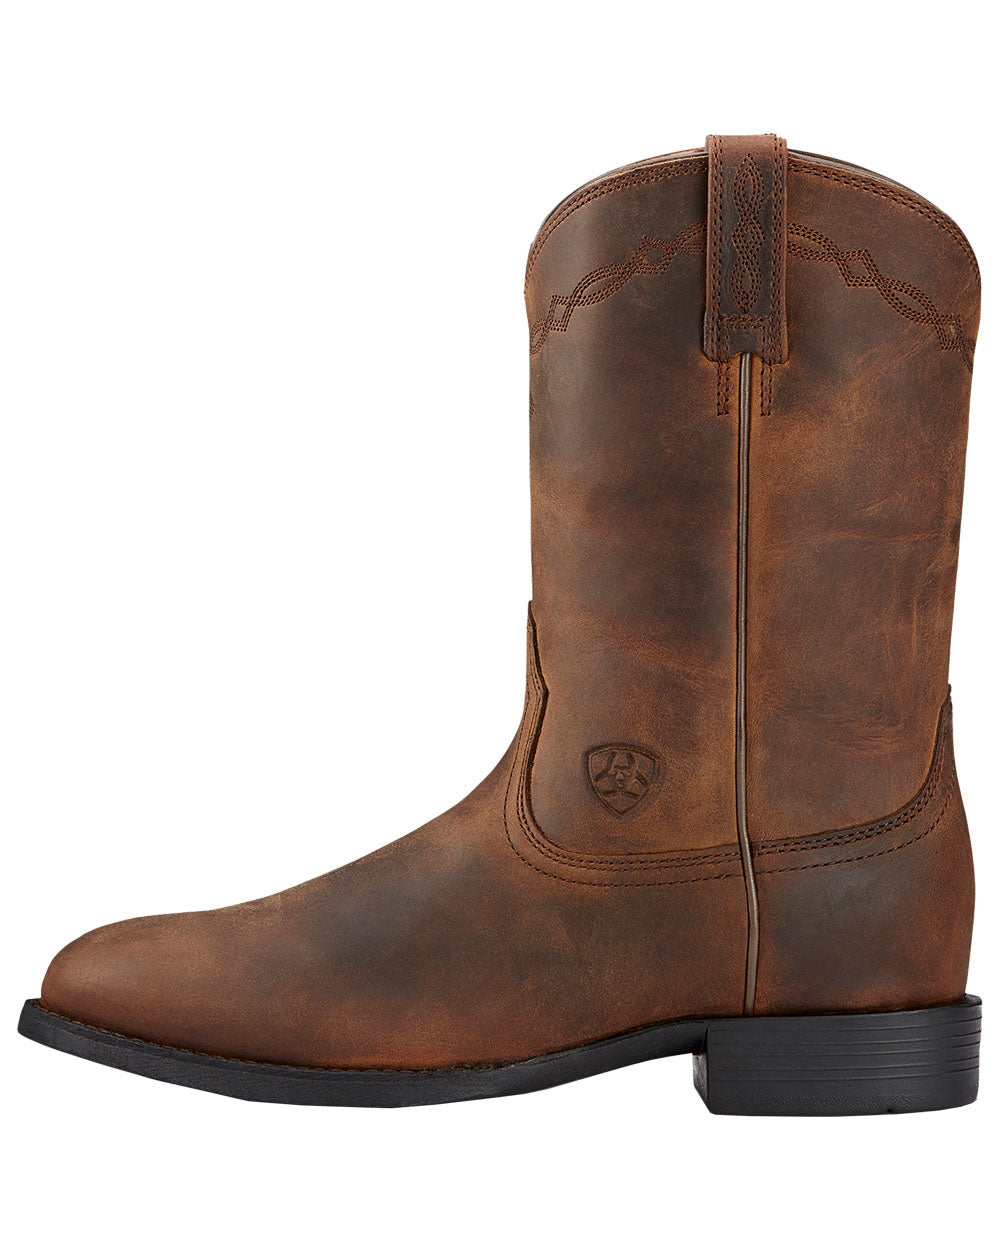 Distressed Brown coloured Ariat Women&